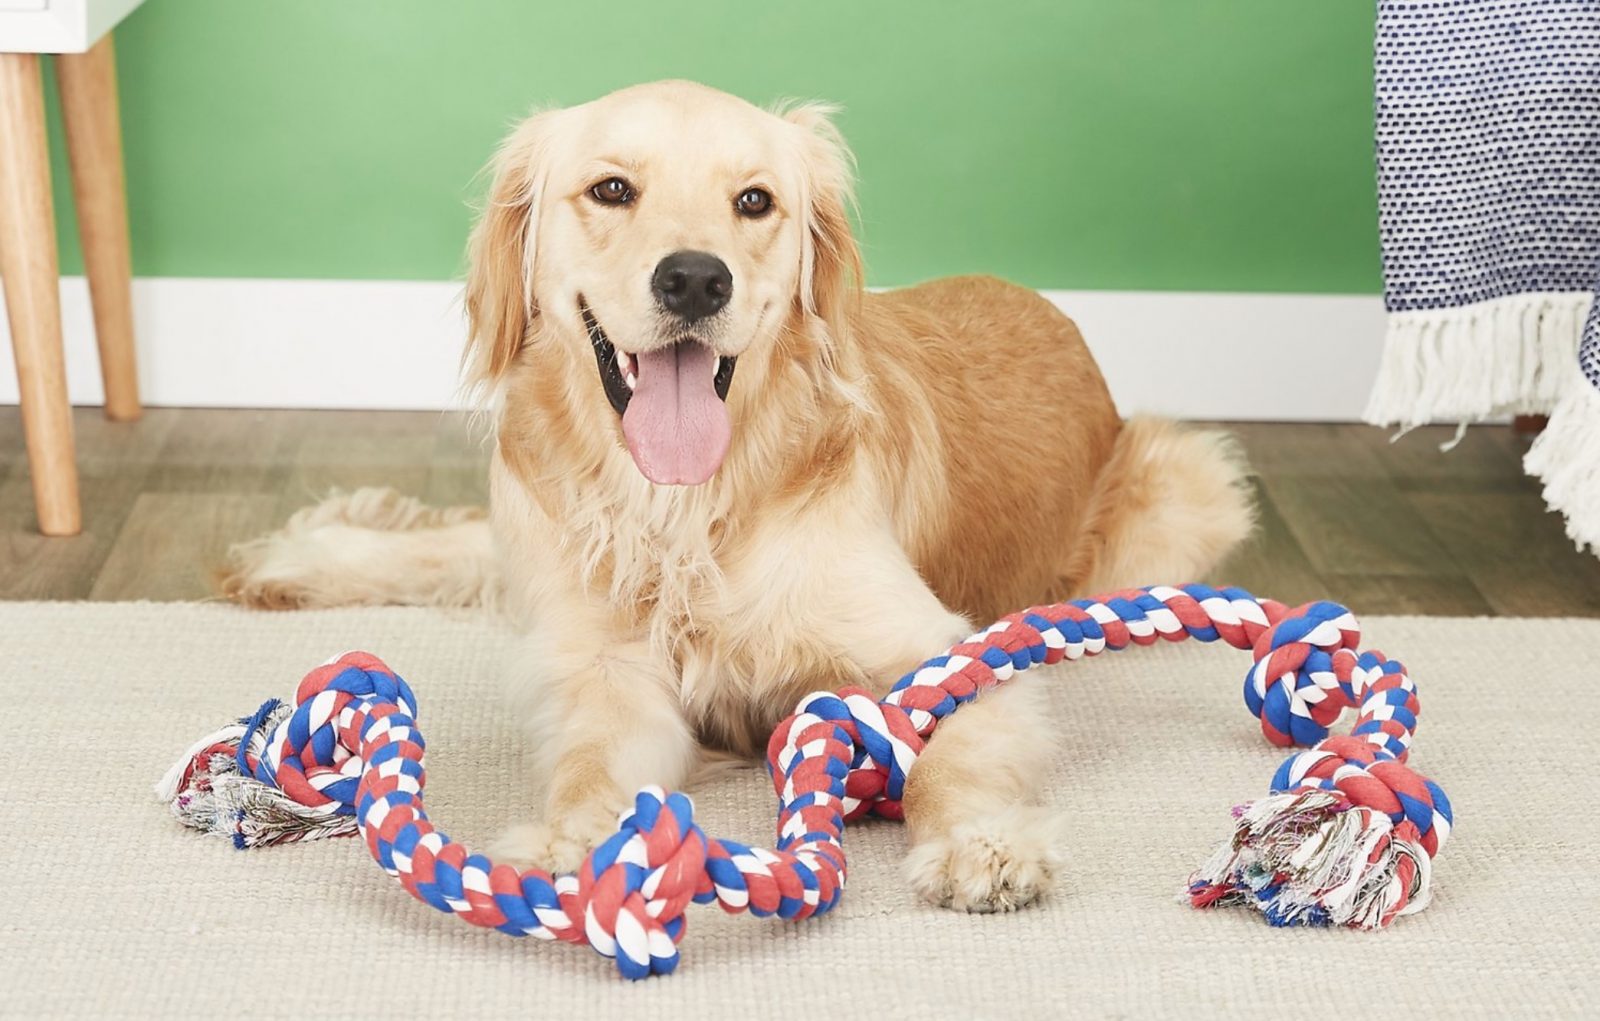 Dog Rope Toys | The Best Dog Rope Toys for Fetch, Tug of War, and More